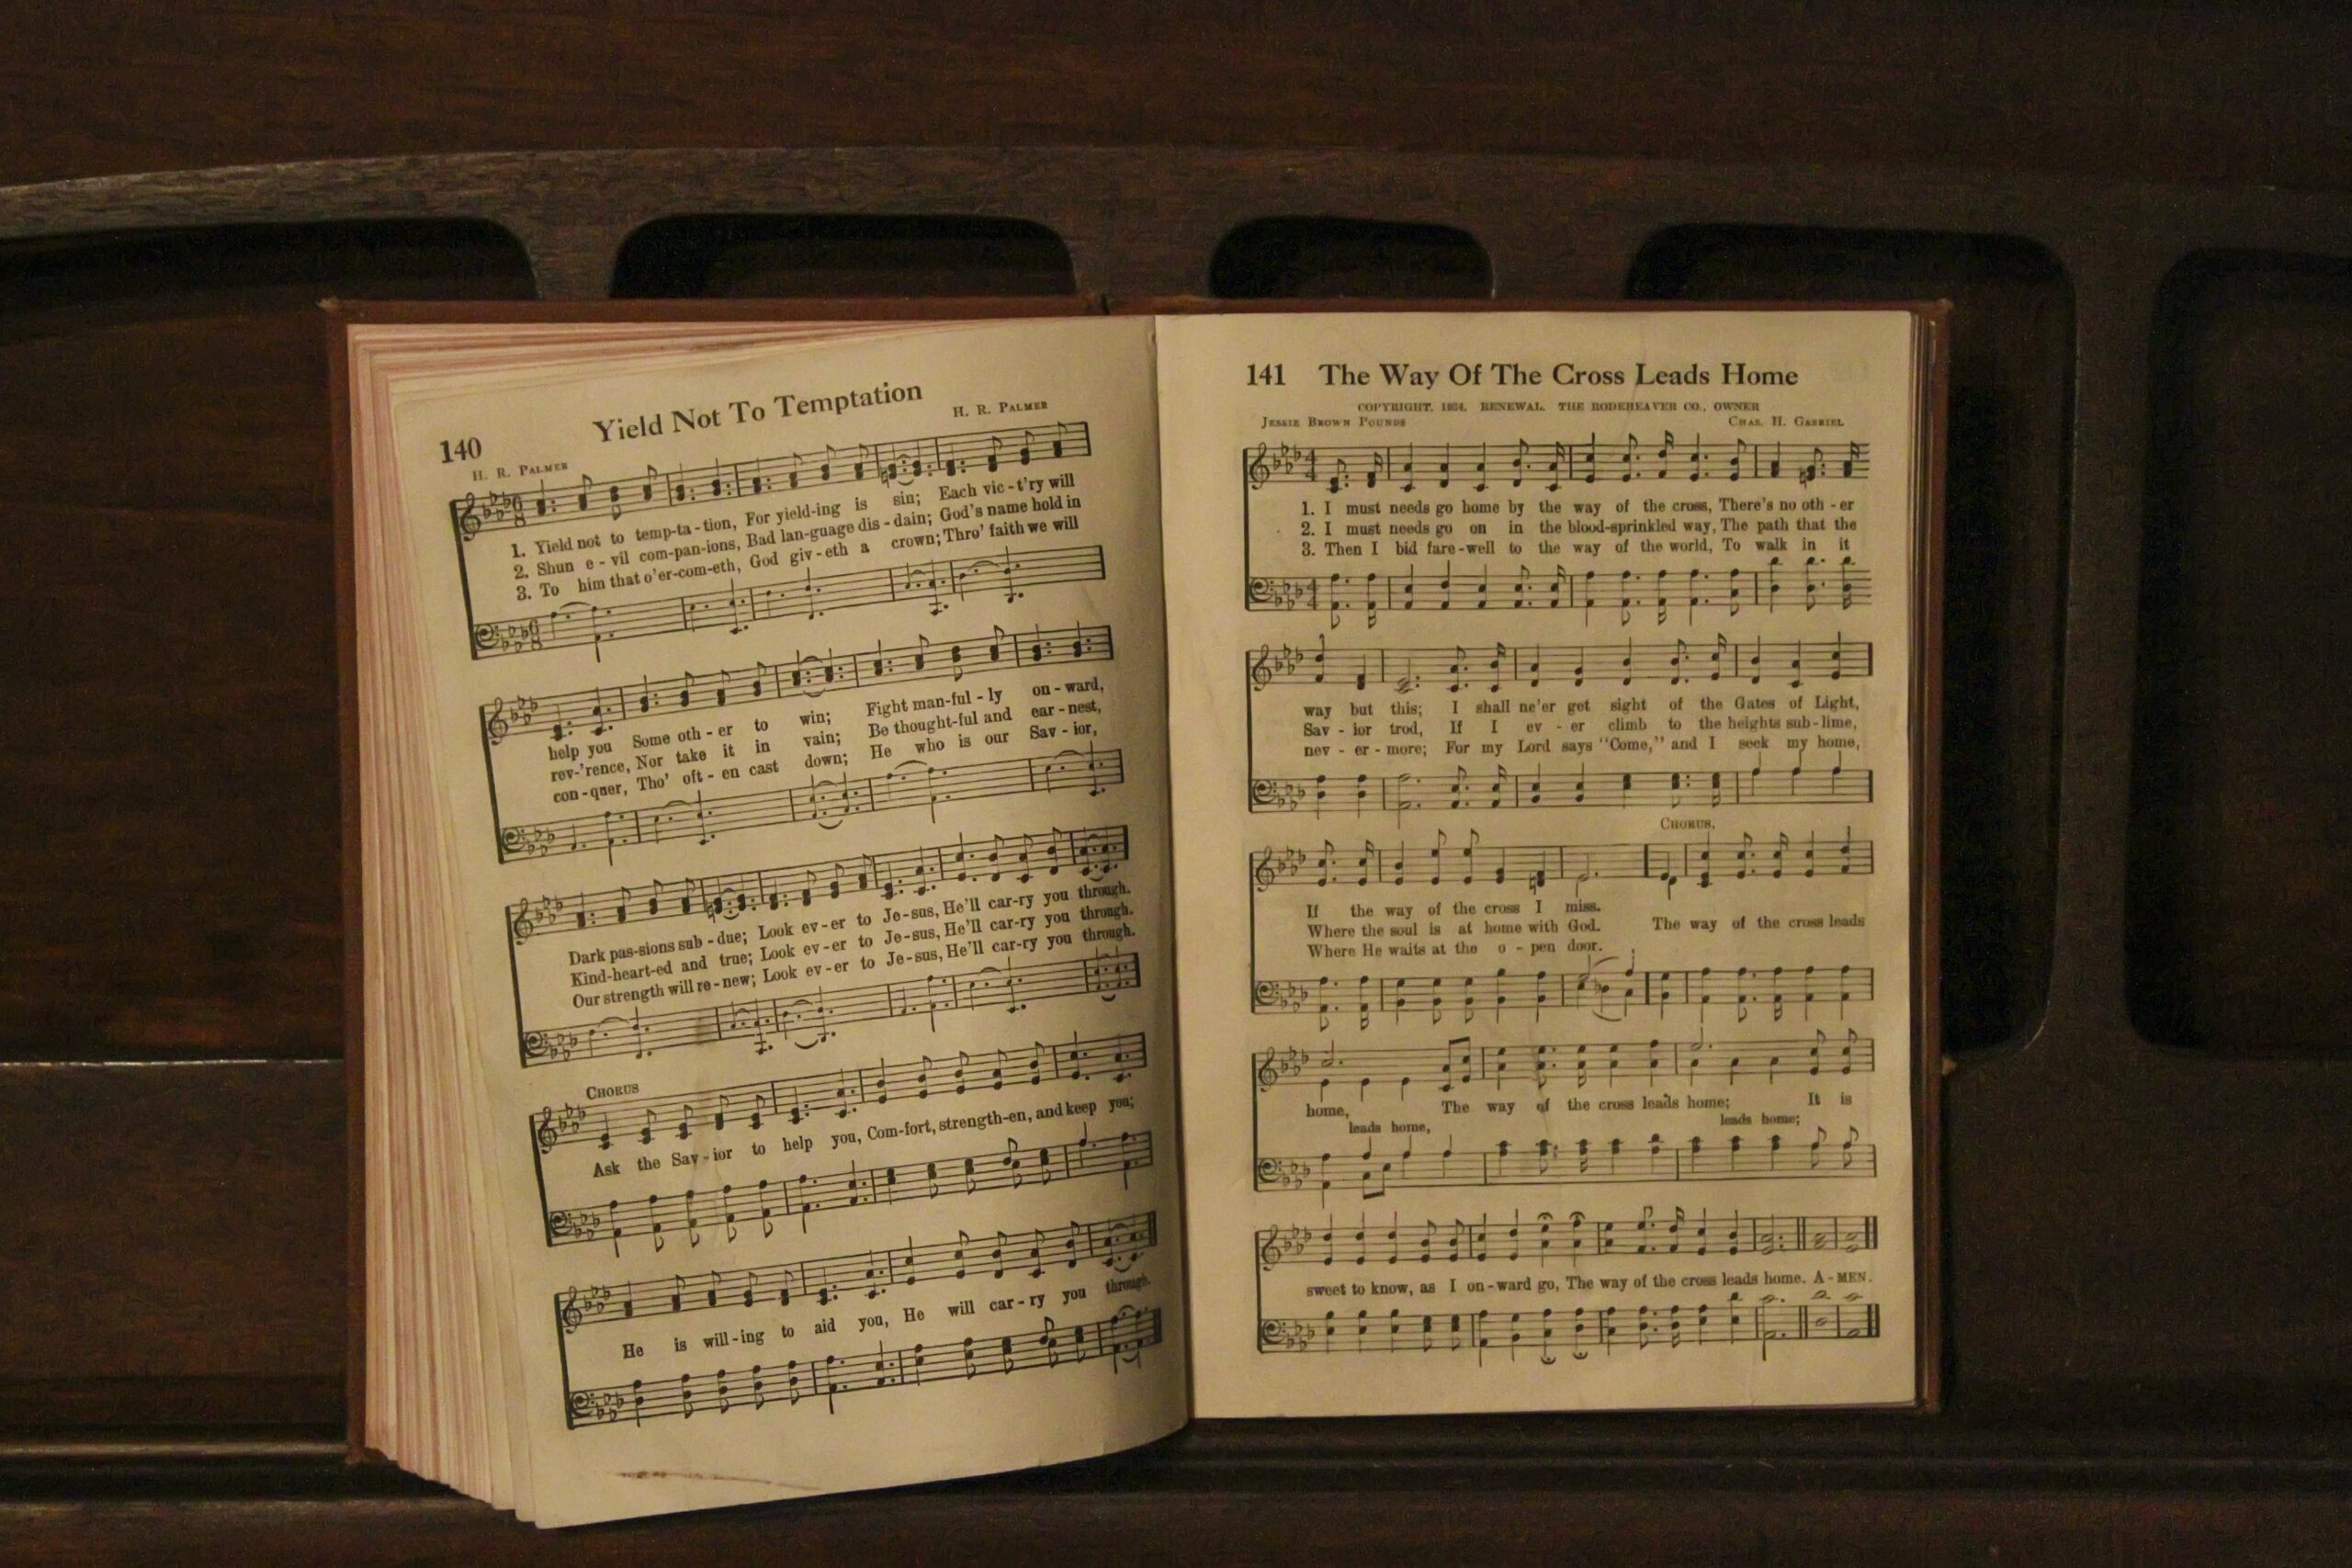 Explore the beauty of hymns based on scripture and their role in enhancing spiritual devotion.